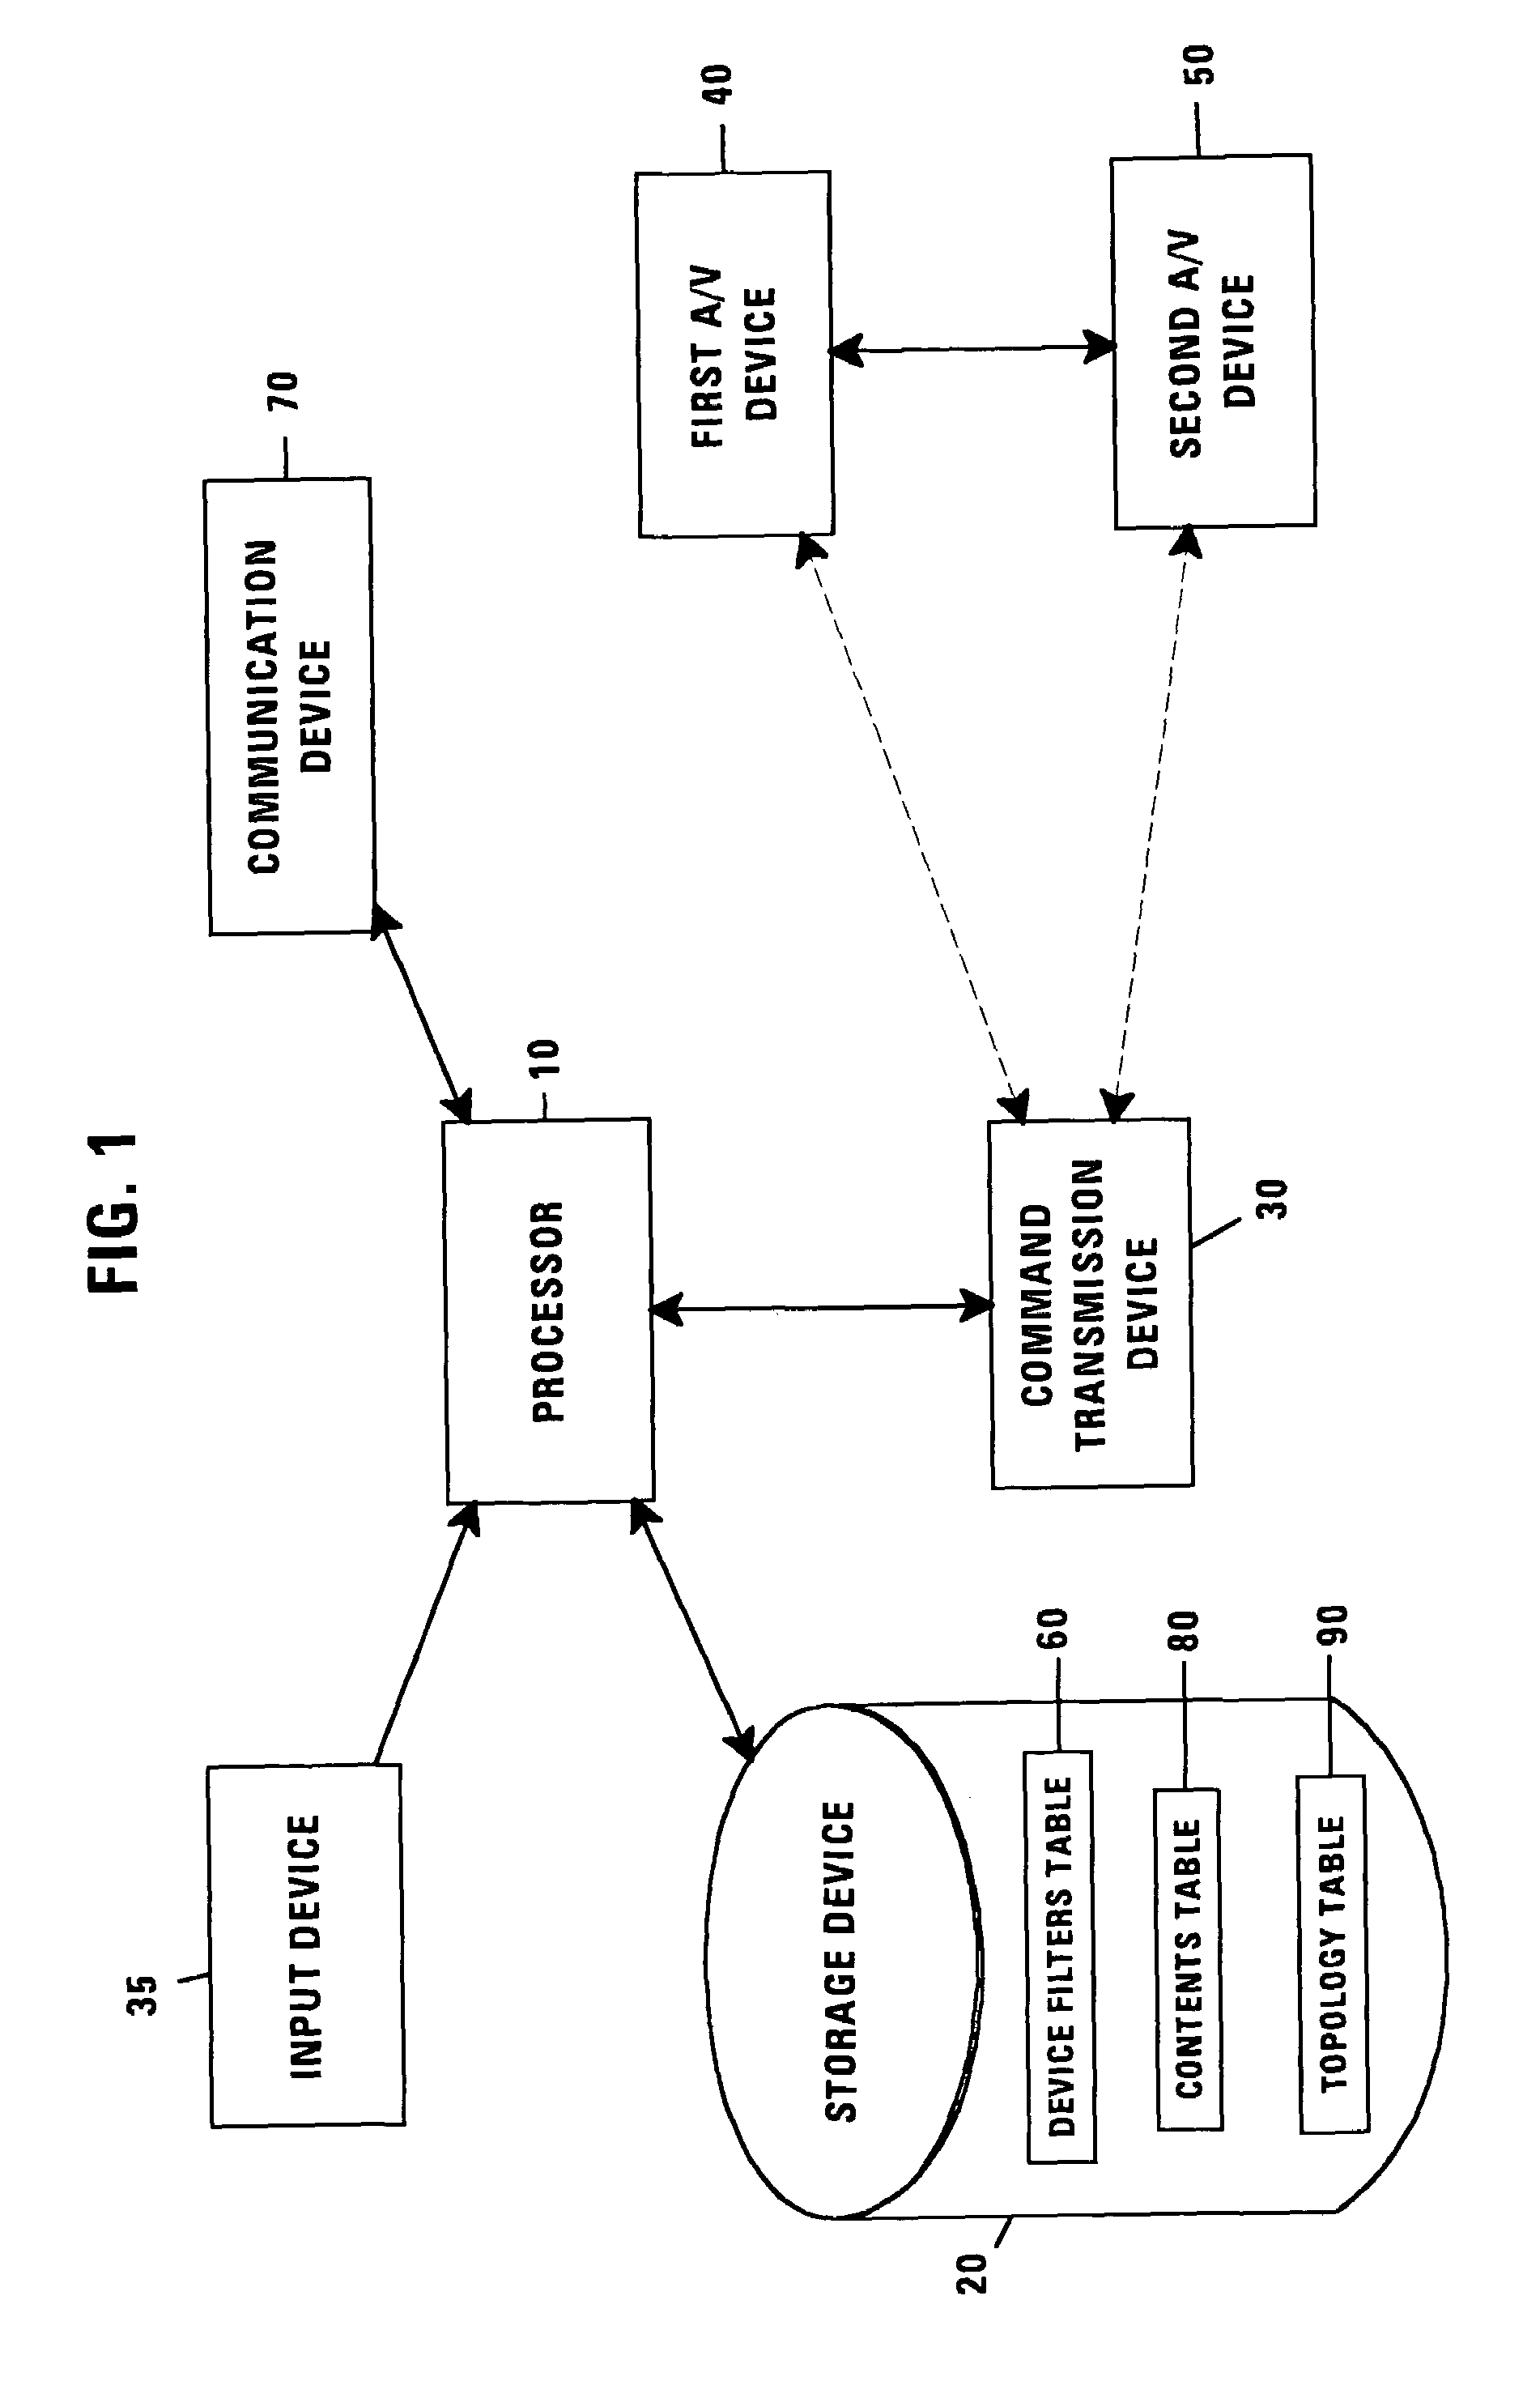 System and method for integrating and controlling audio/video devices